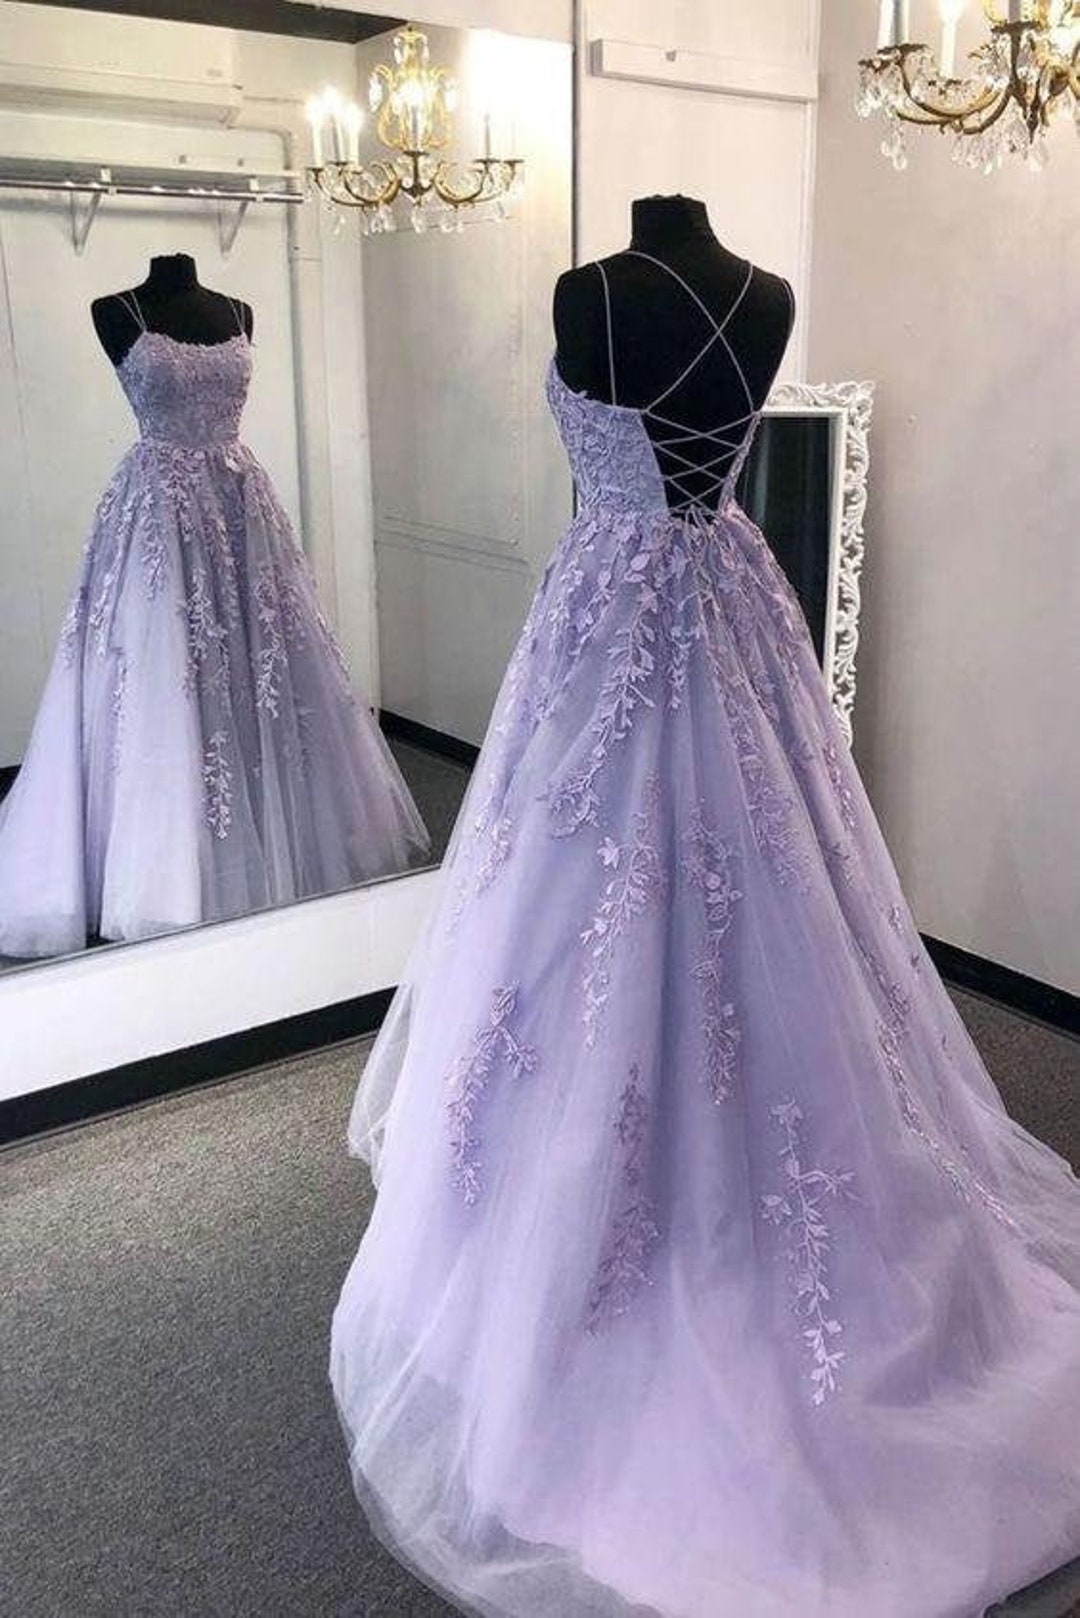 Lilac Tulle A-line Lace Appliques Prom Dresses, MP739 | Musebridals